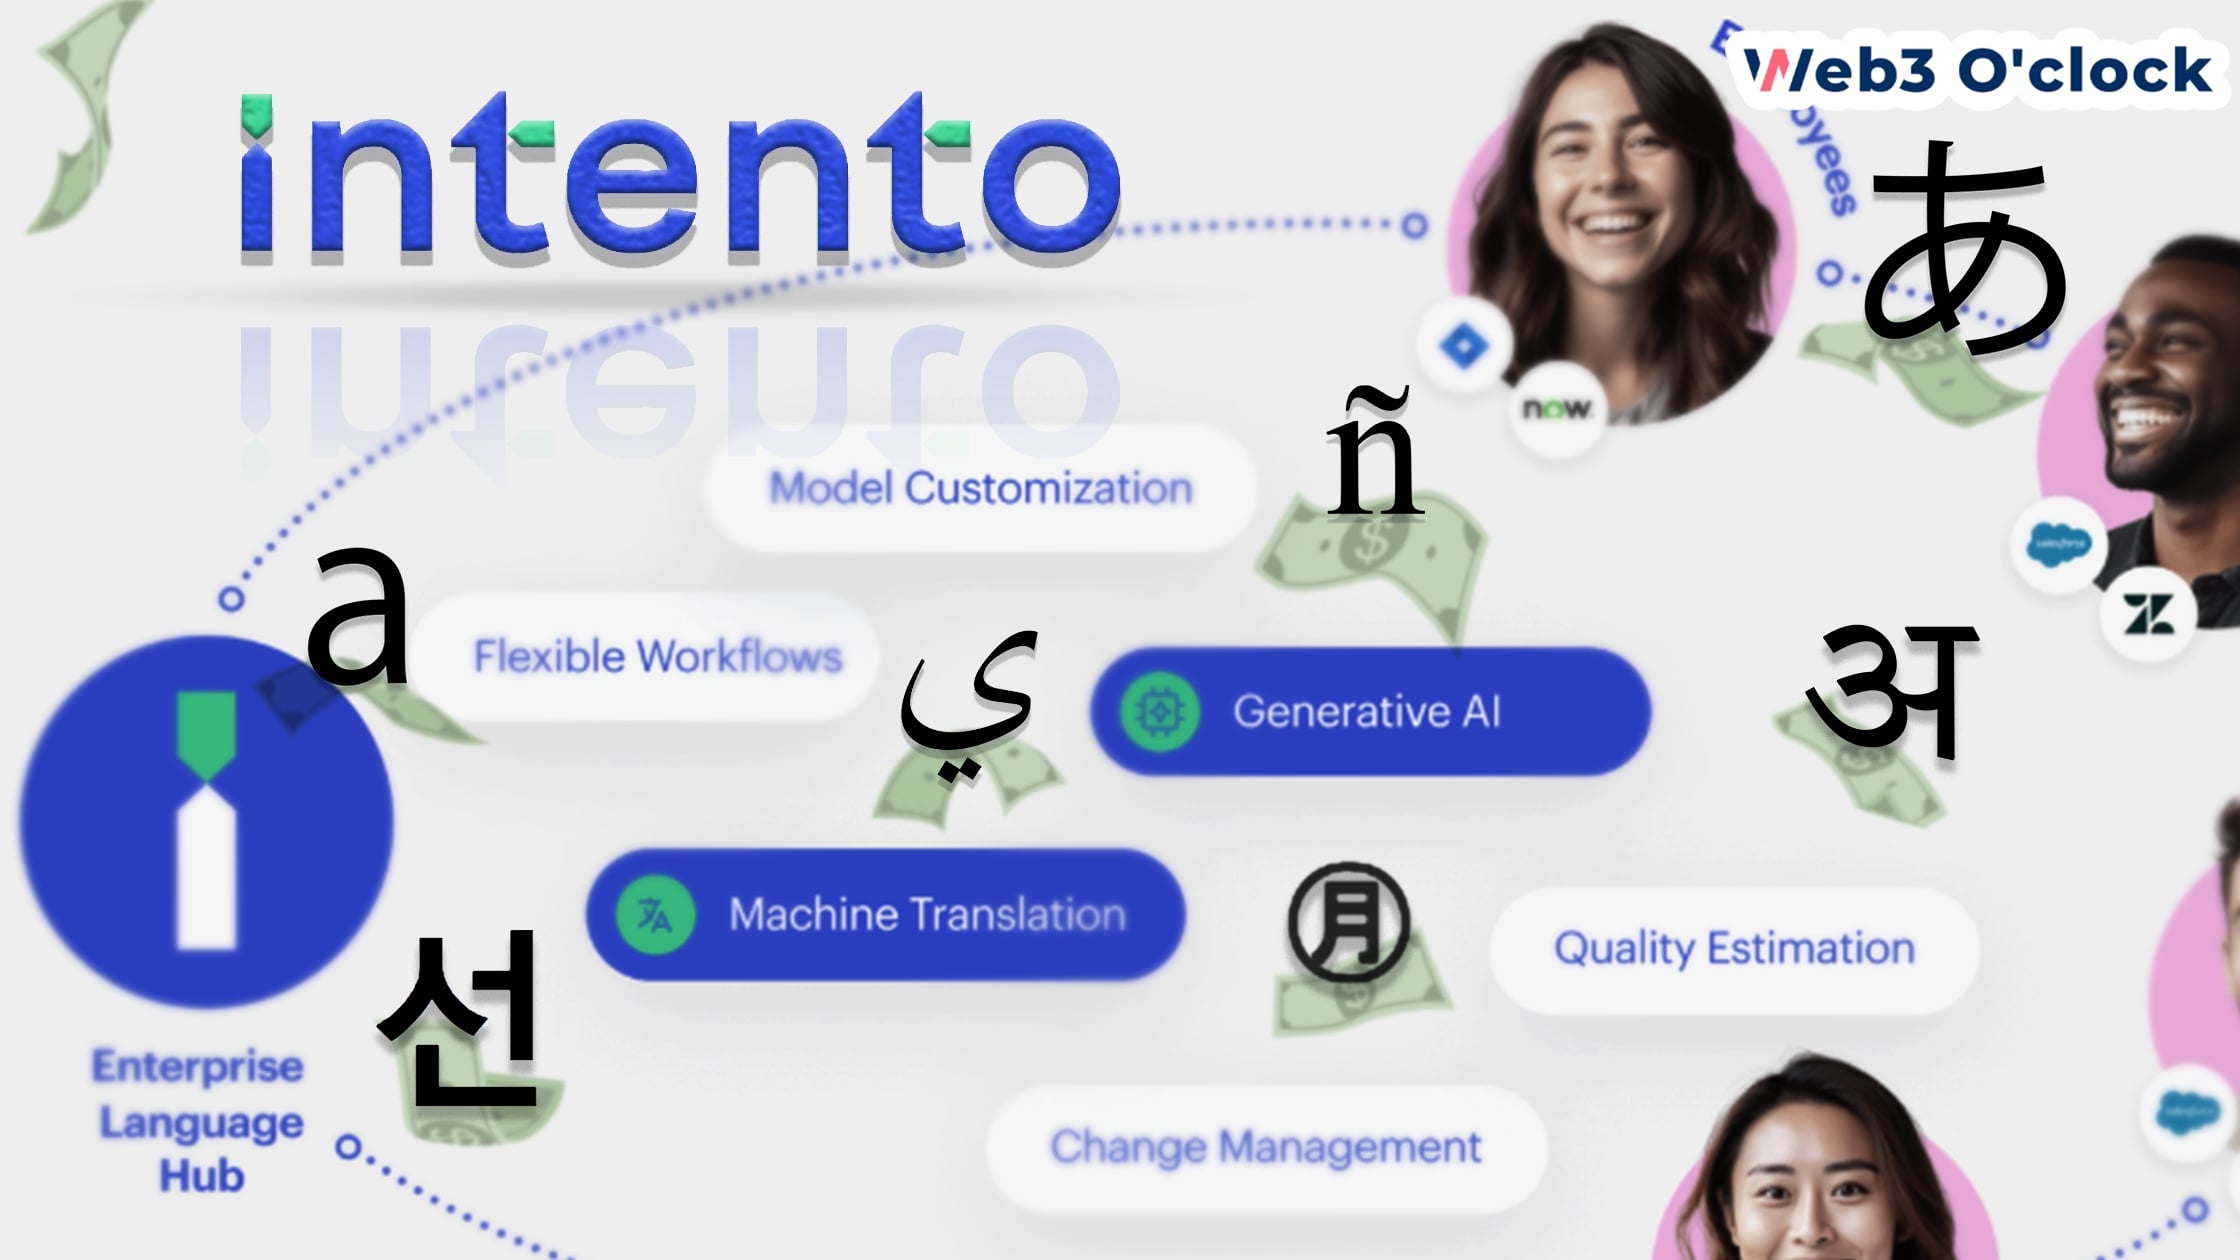 Intento Secures $8M in Series A Funding by web3oclock